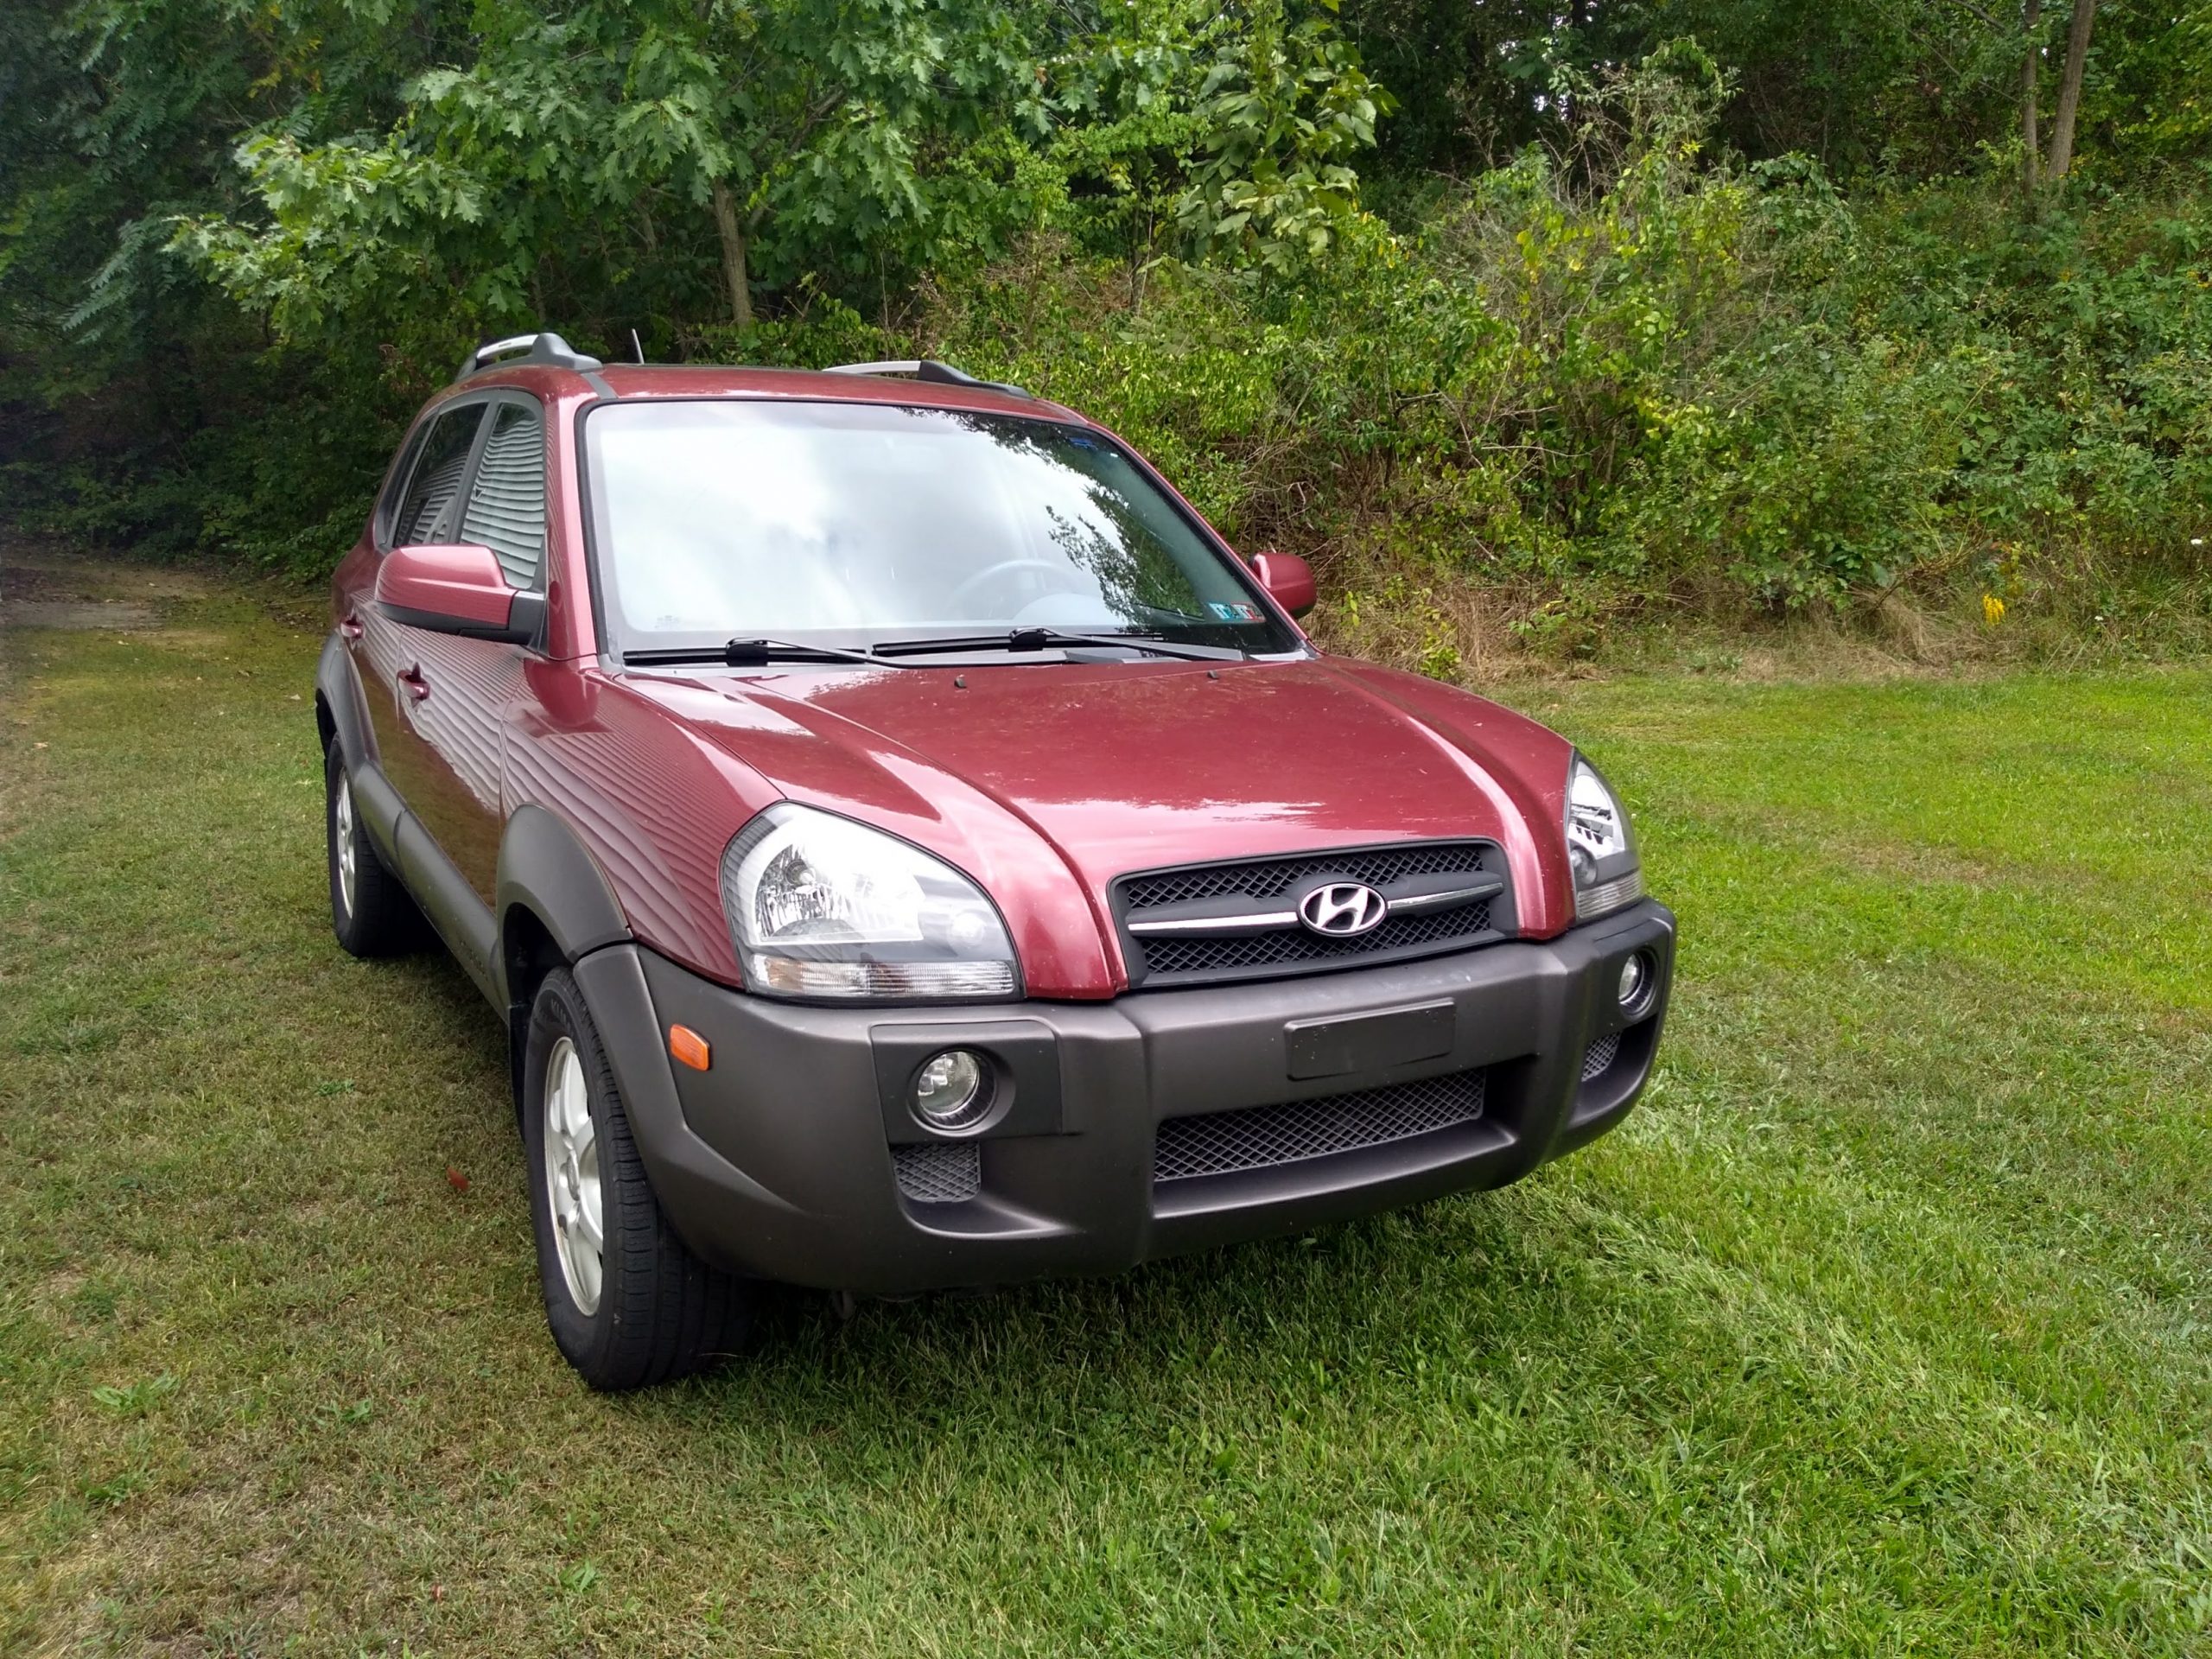 Passenger front quarter view of a burgundy and gray 2005 Hyundai Tucson sitting in the grass.